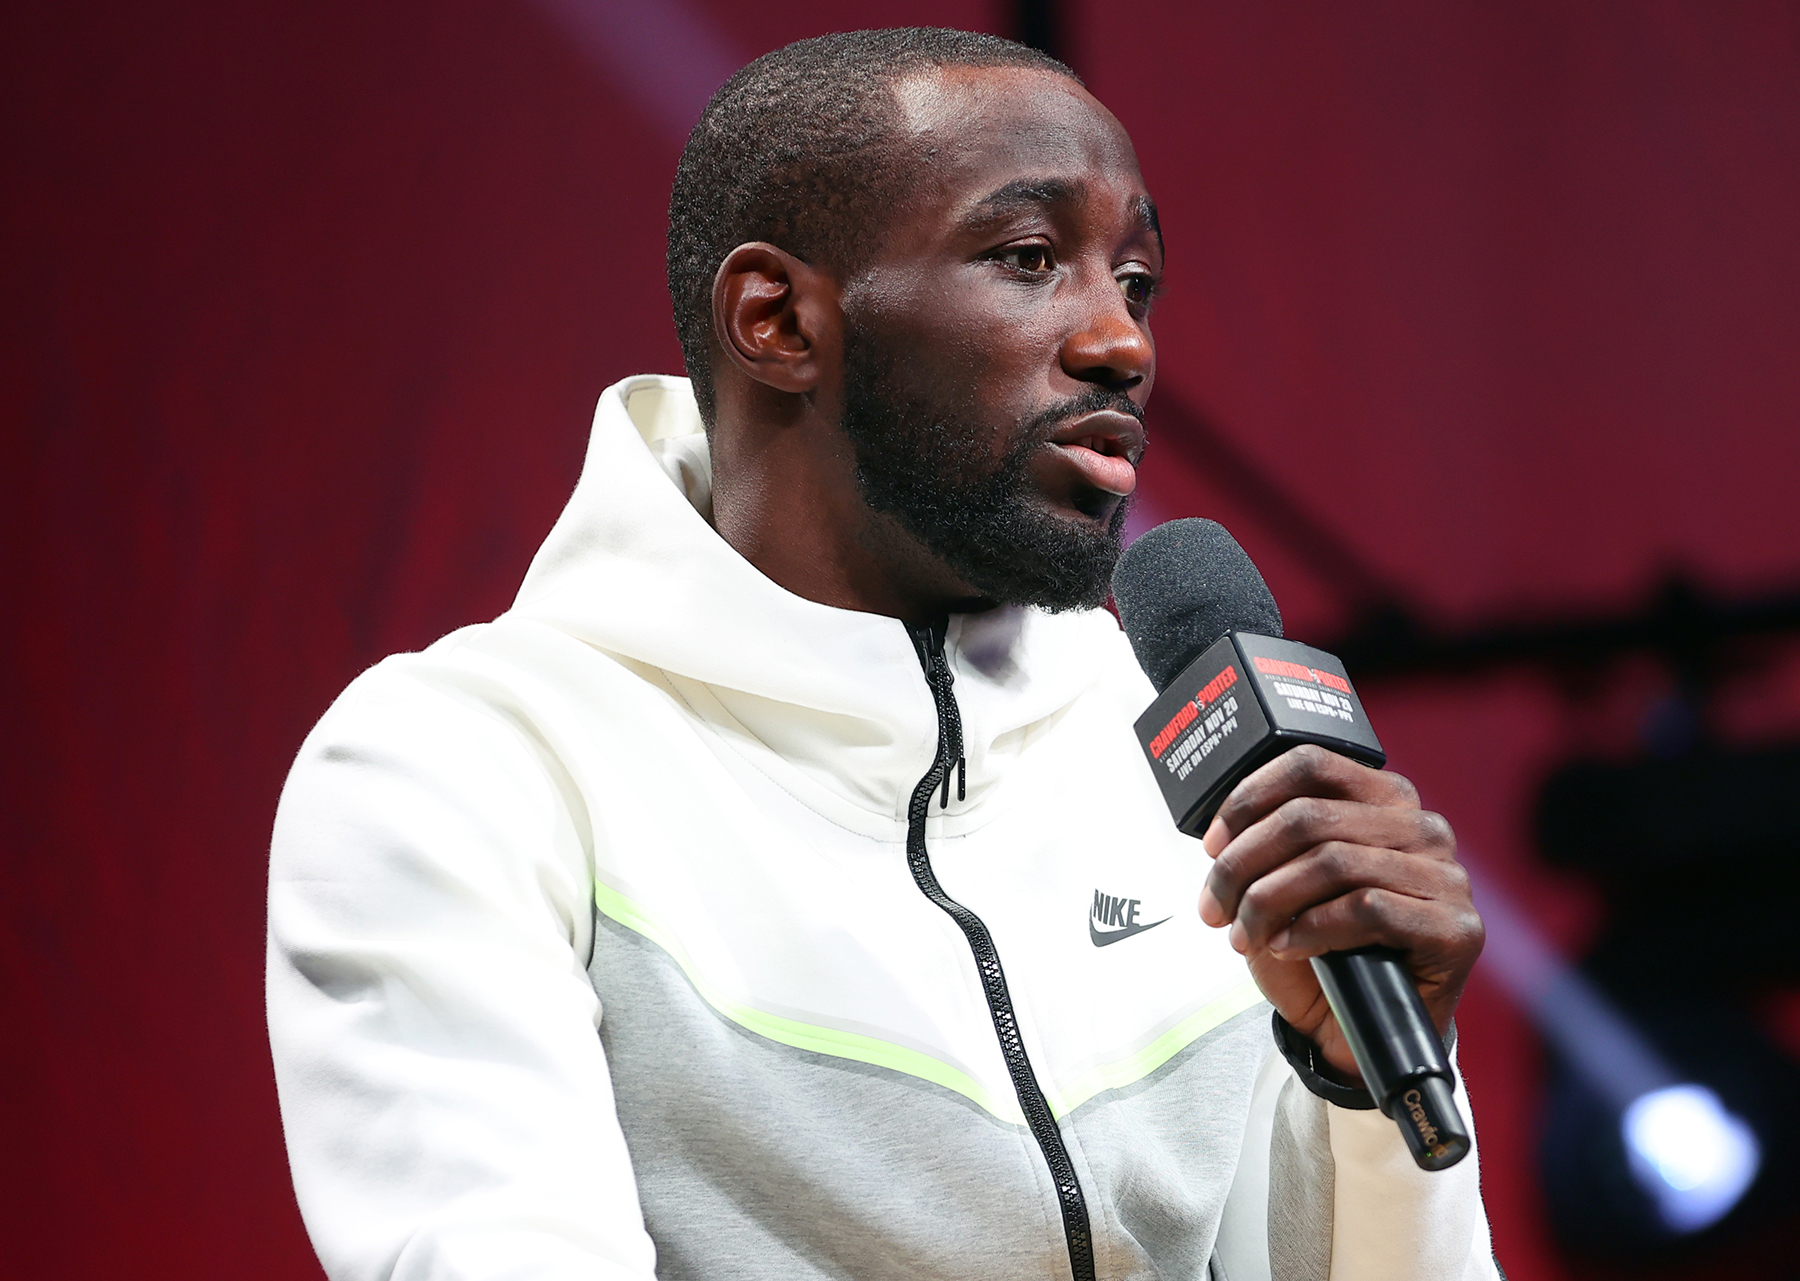 Terence Crawford sues Top Rank, alleging “racial bias” and breach of contract